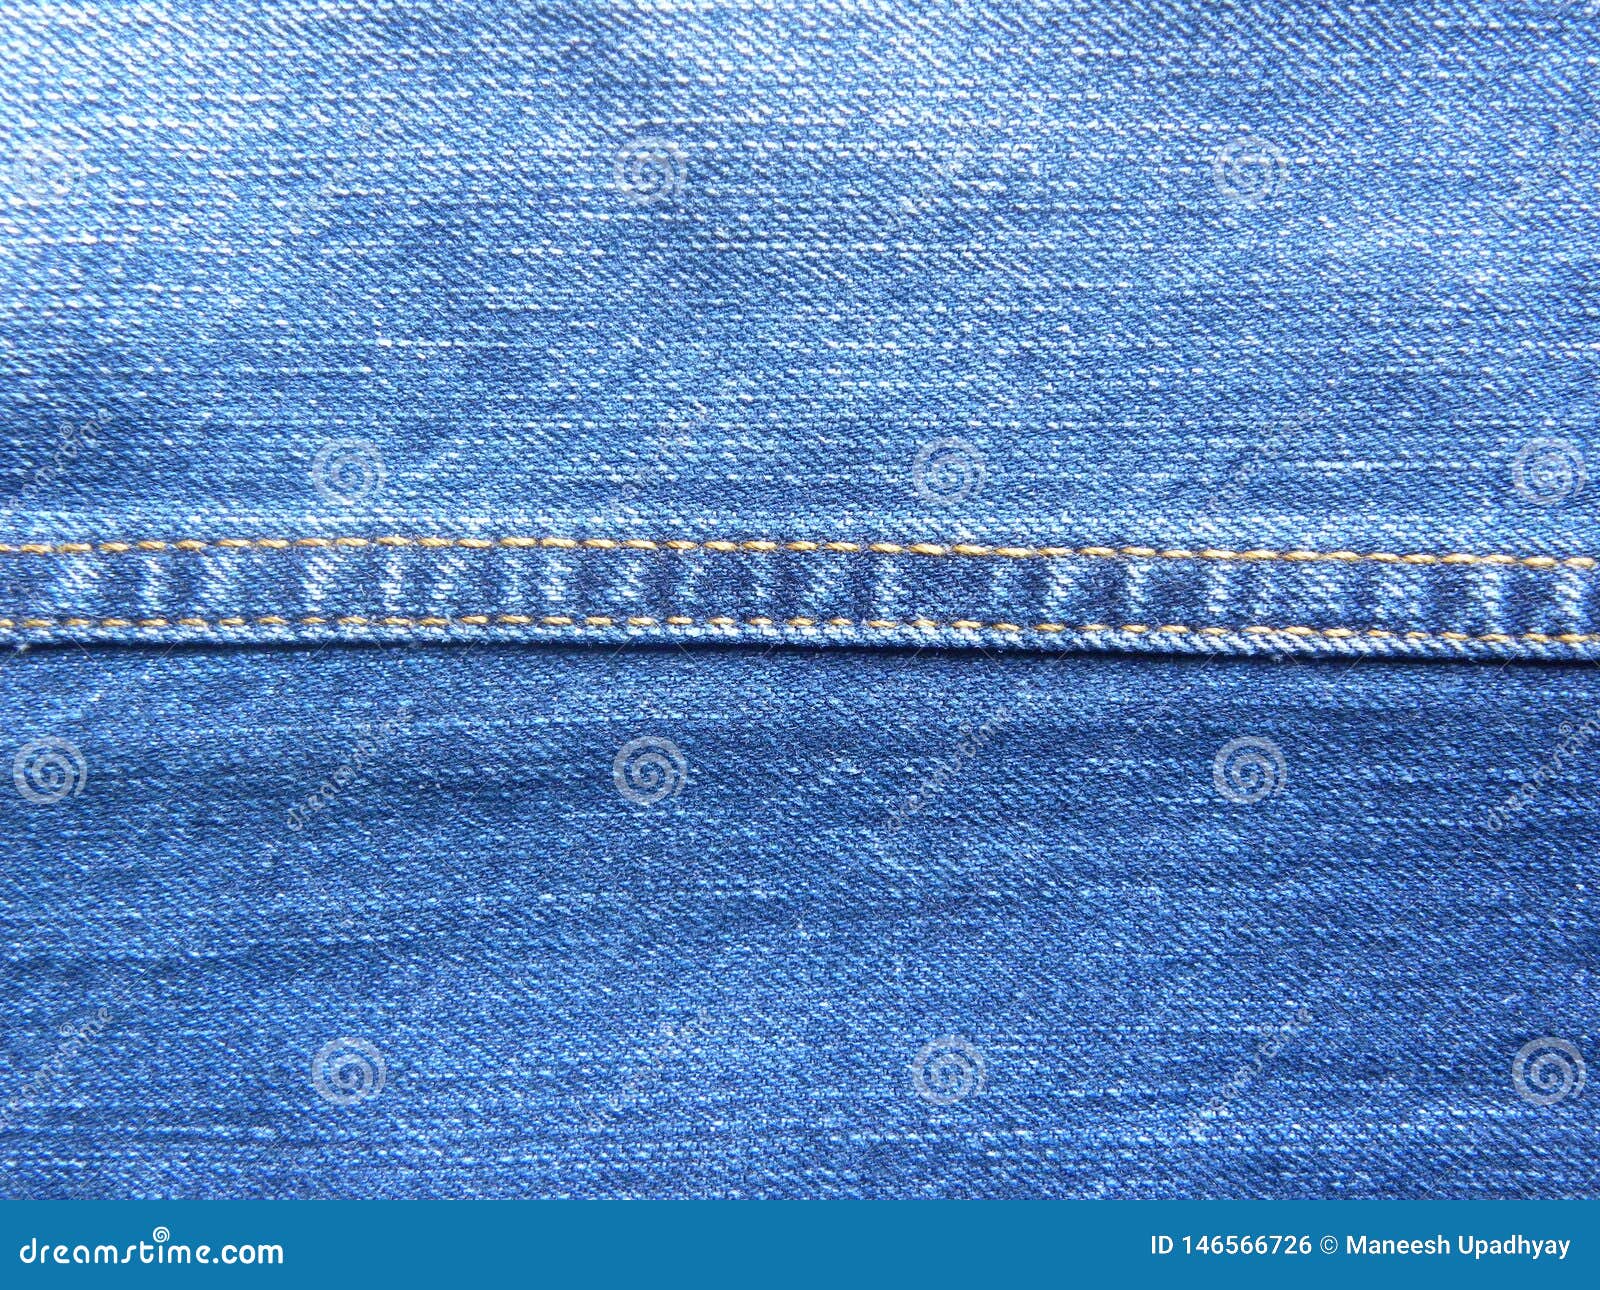 Double Lapped Seam on Blue Jeans Stock Photo - Image of pants, blue ...